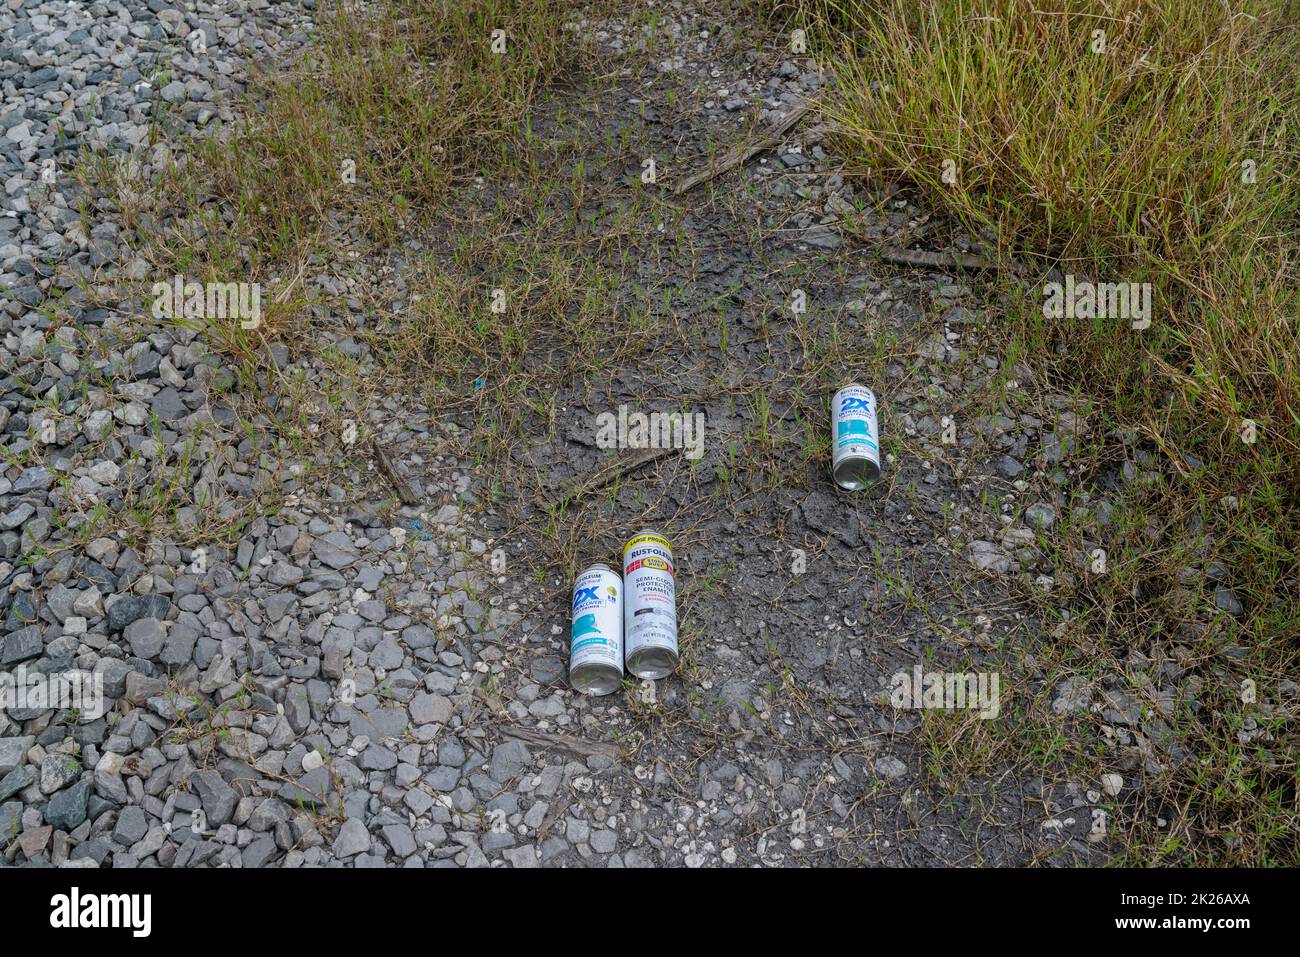 NEW ORLEANS, LA, USA - SEPTEMBER 17, 2022: Discarded paint cans left on the ground by vandals after tagging railroad car in Uptown New Orleans Stock Photo